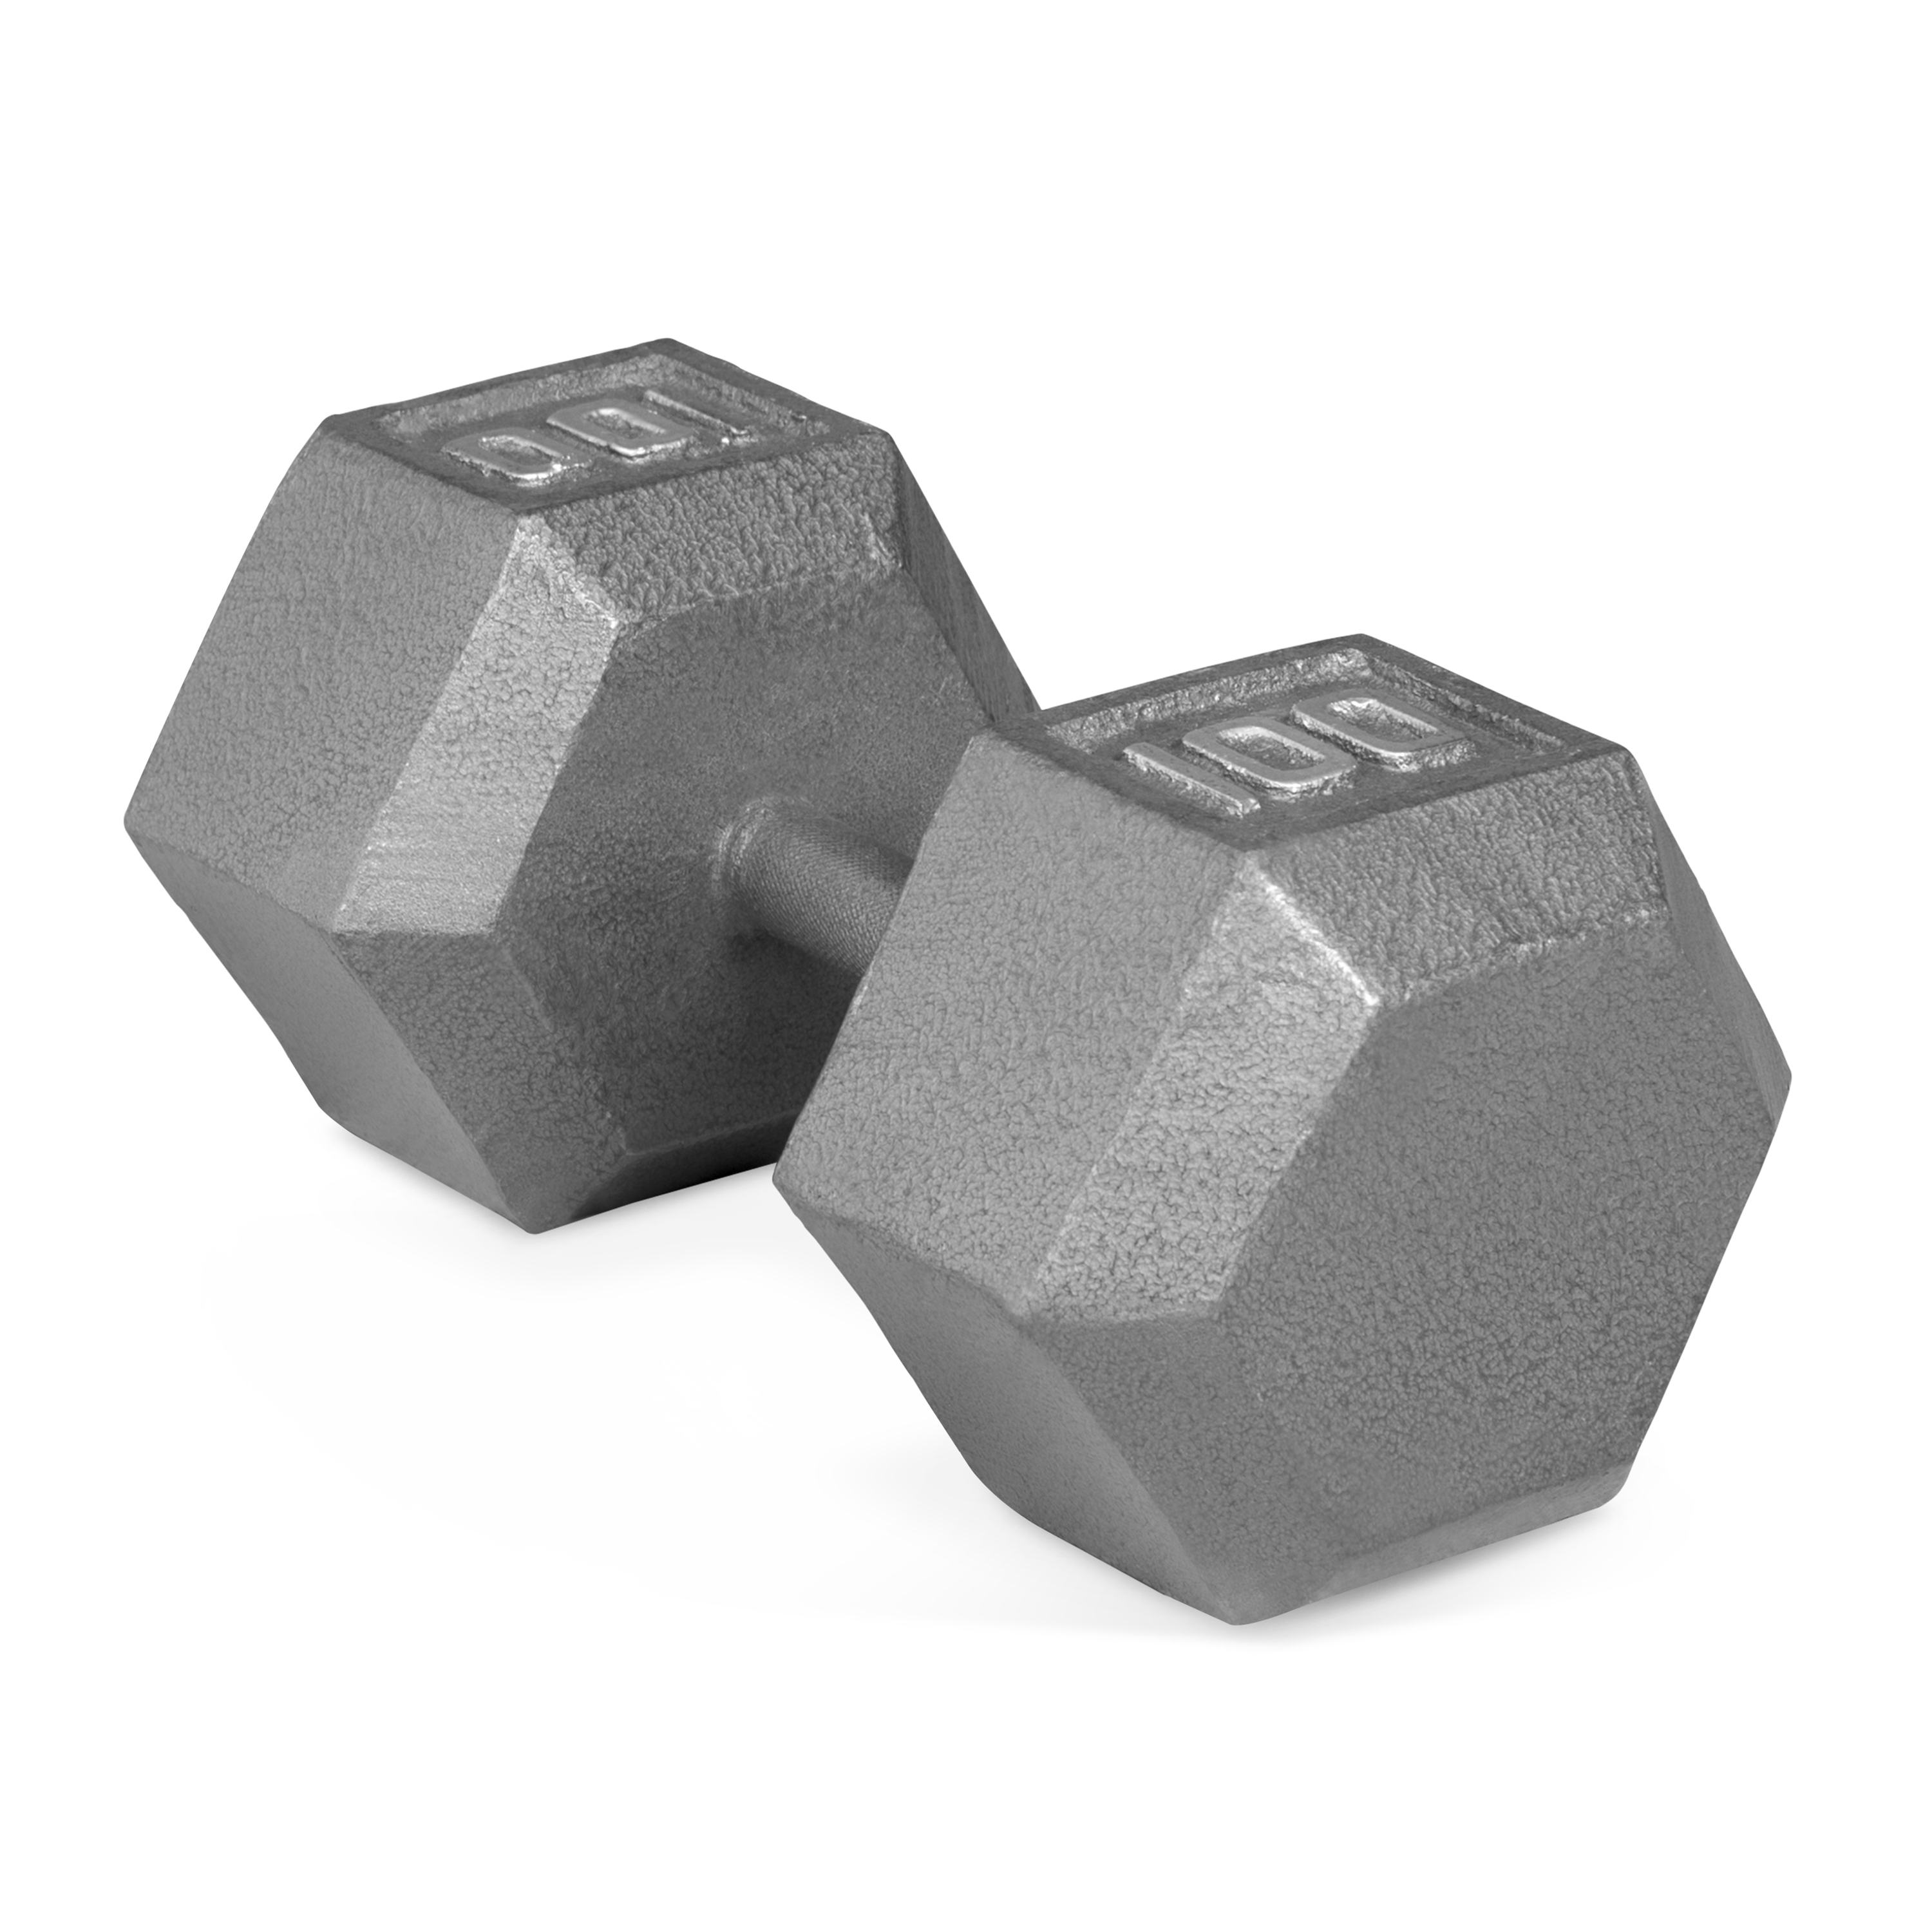 CAP Barbell 100lb Cast Iron Hex Dumbbell, Single - image 1 of 5